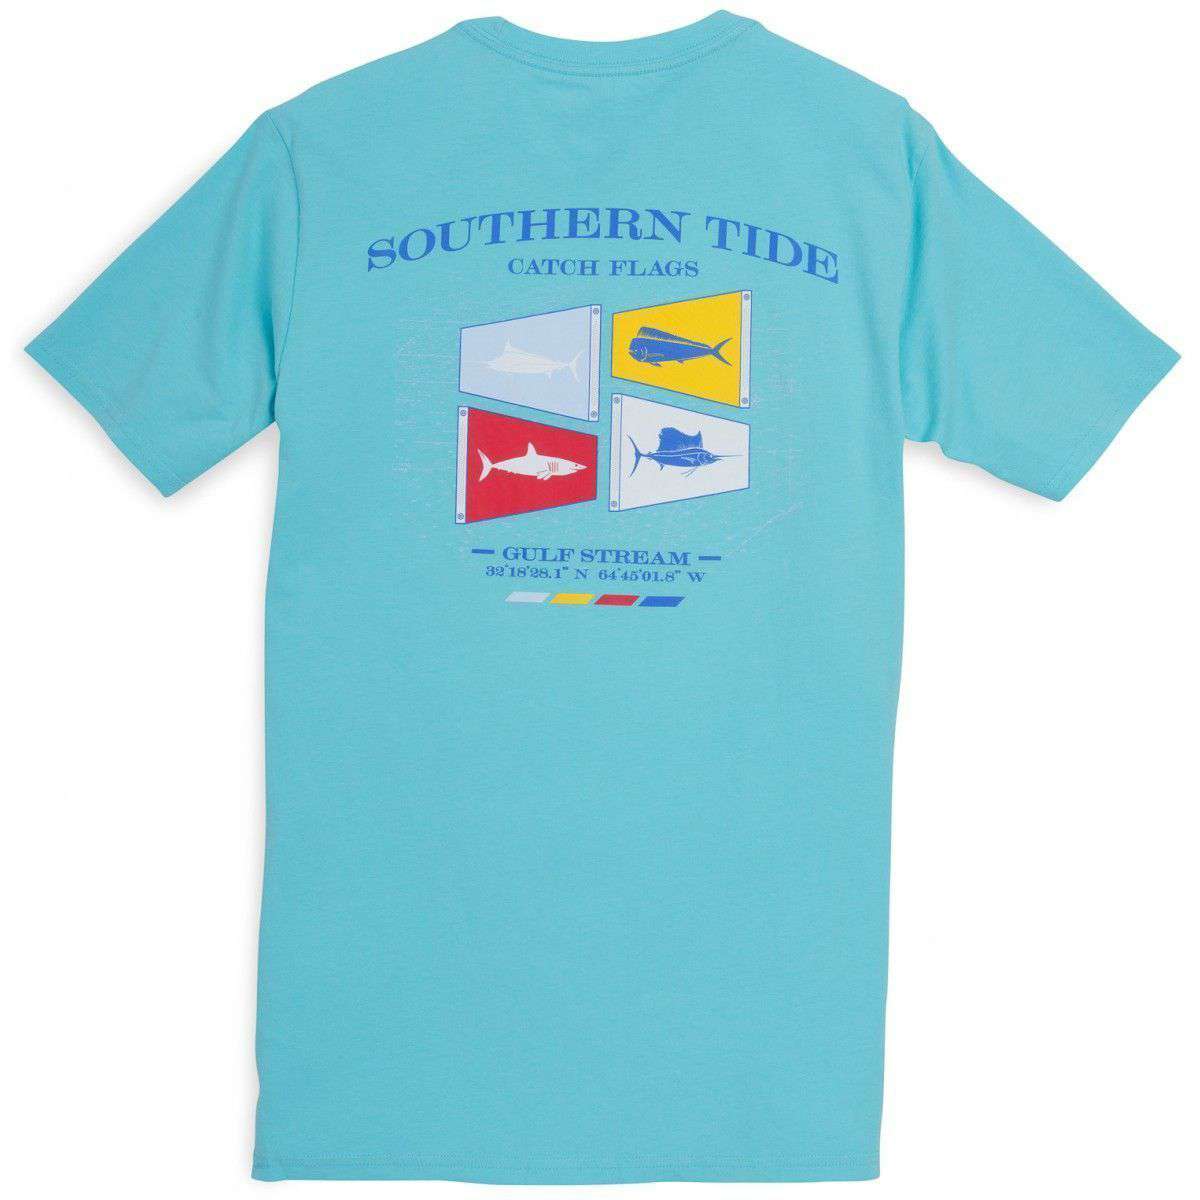 Catch Flags II Tee-Shirt in Crystal Blue by Southern Tide - Country Club Prep